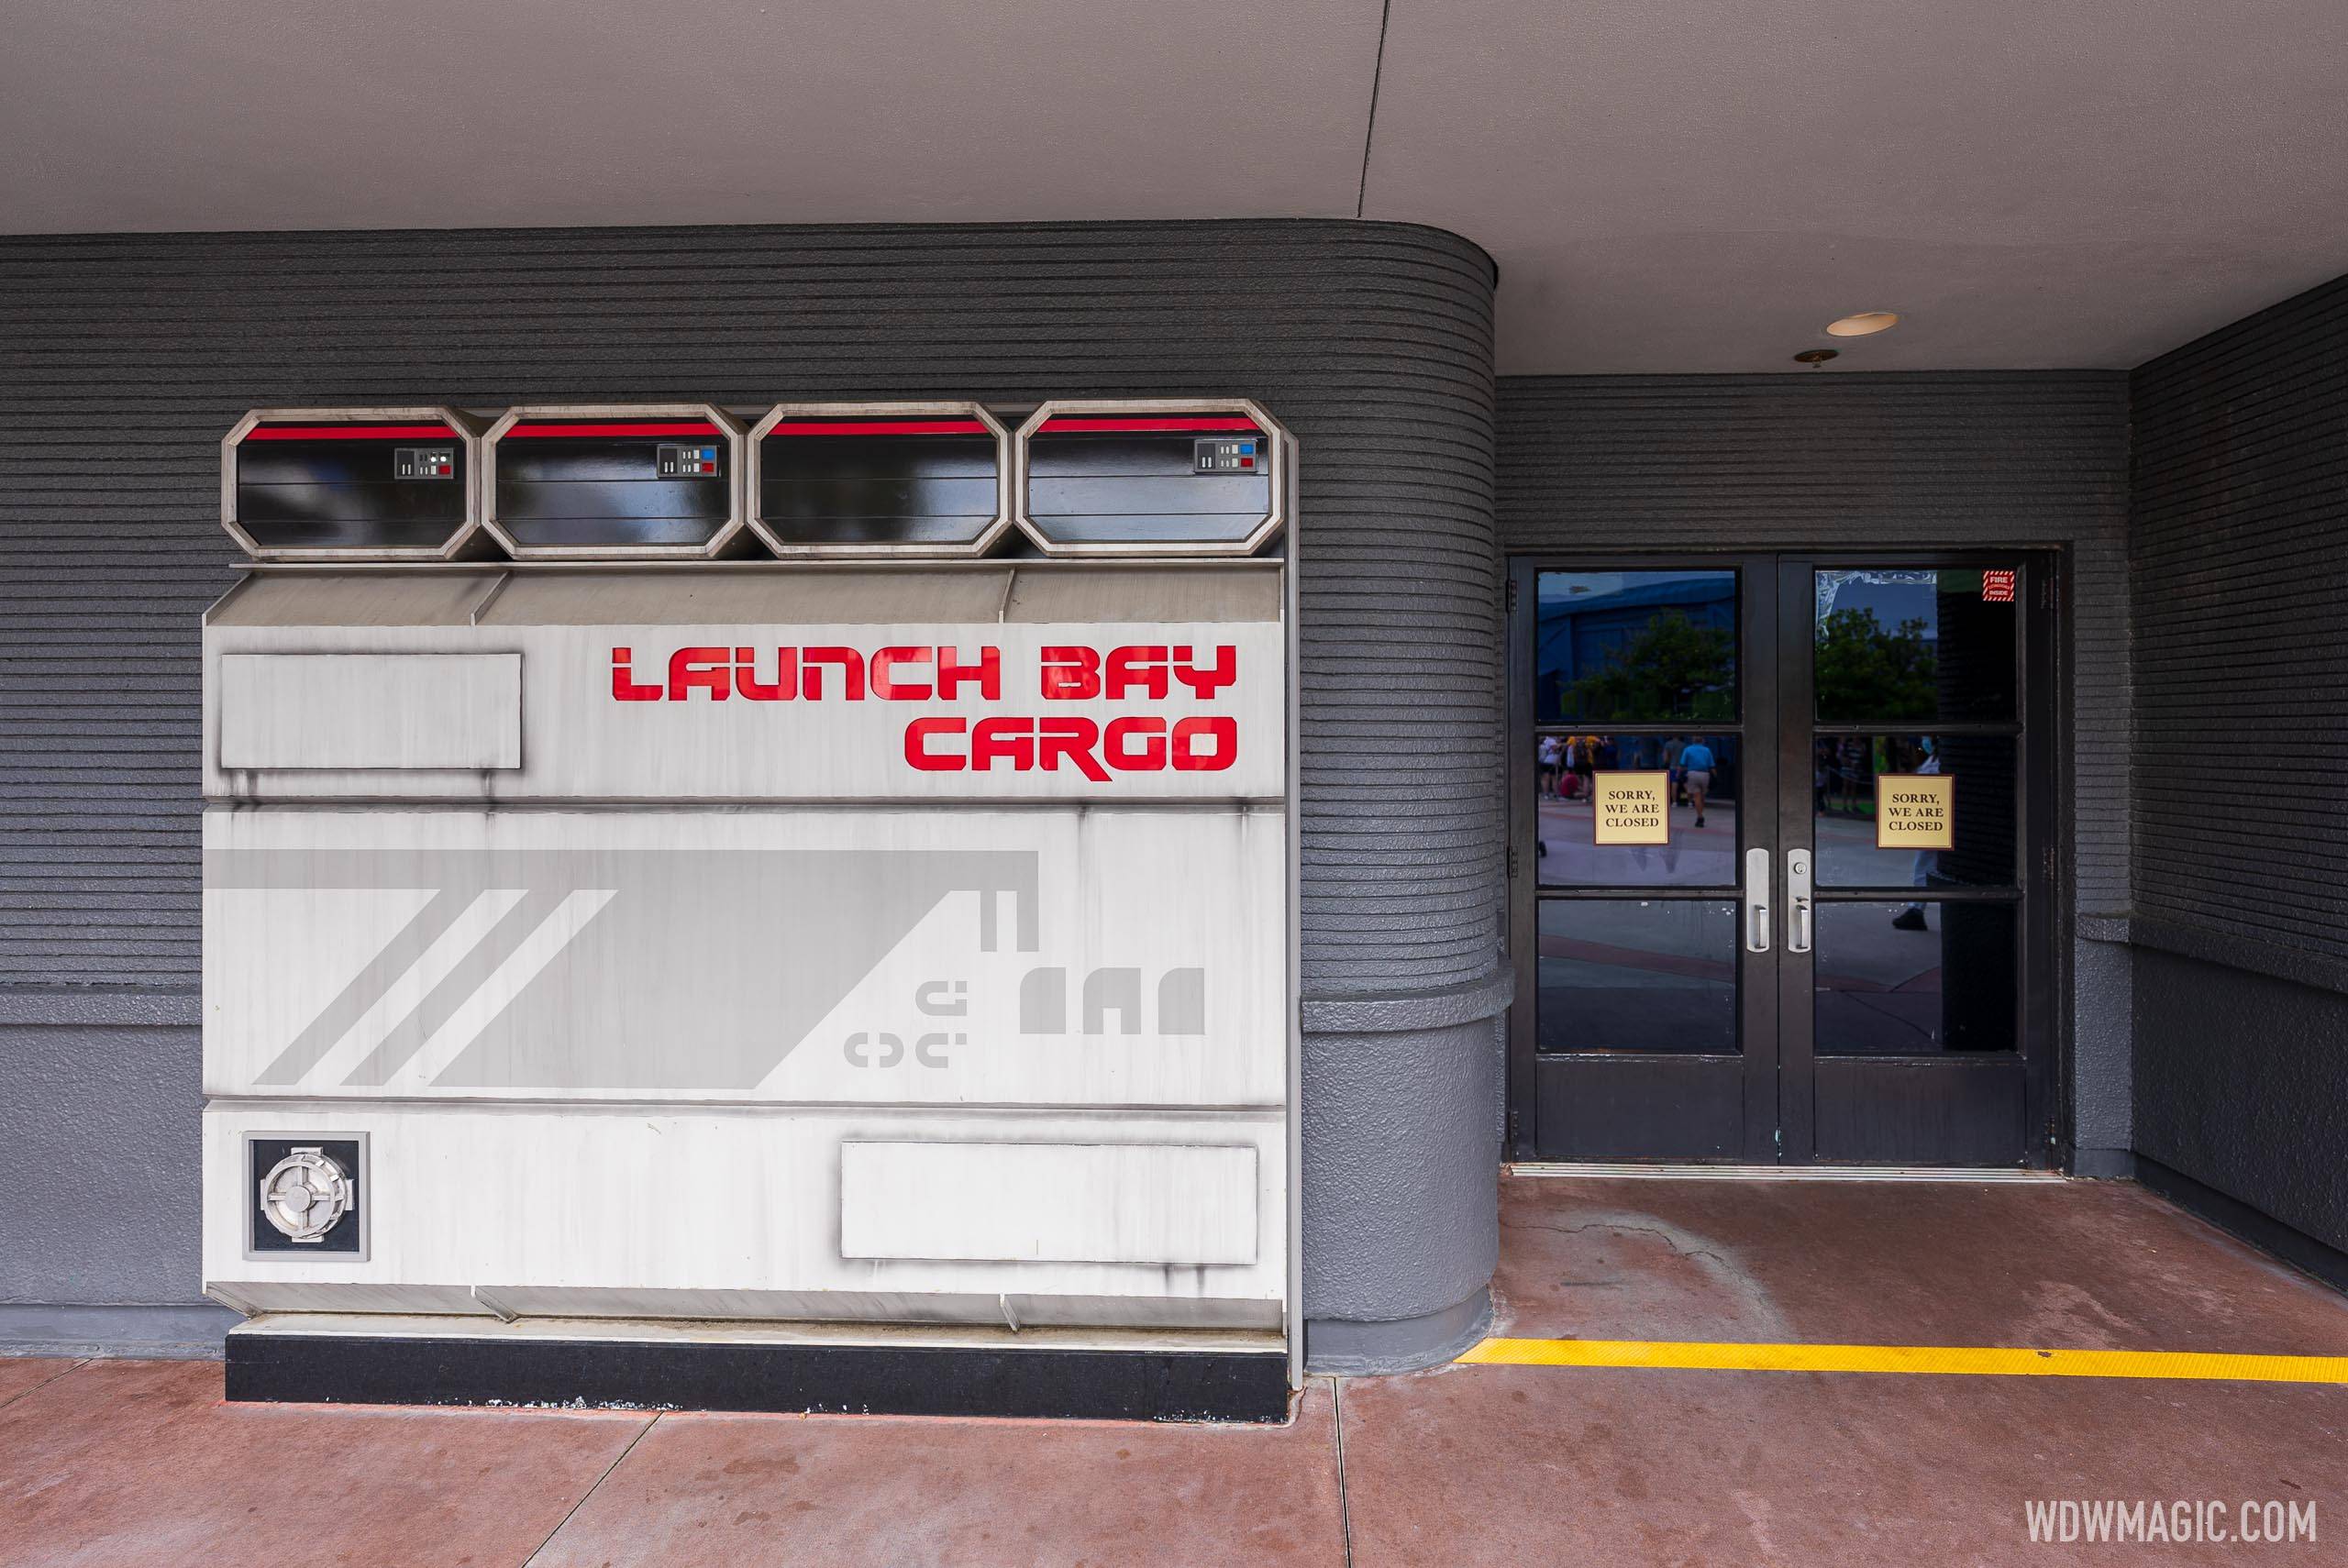 Launch Bay Cargo is closed